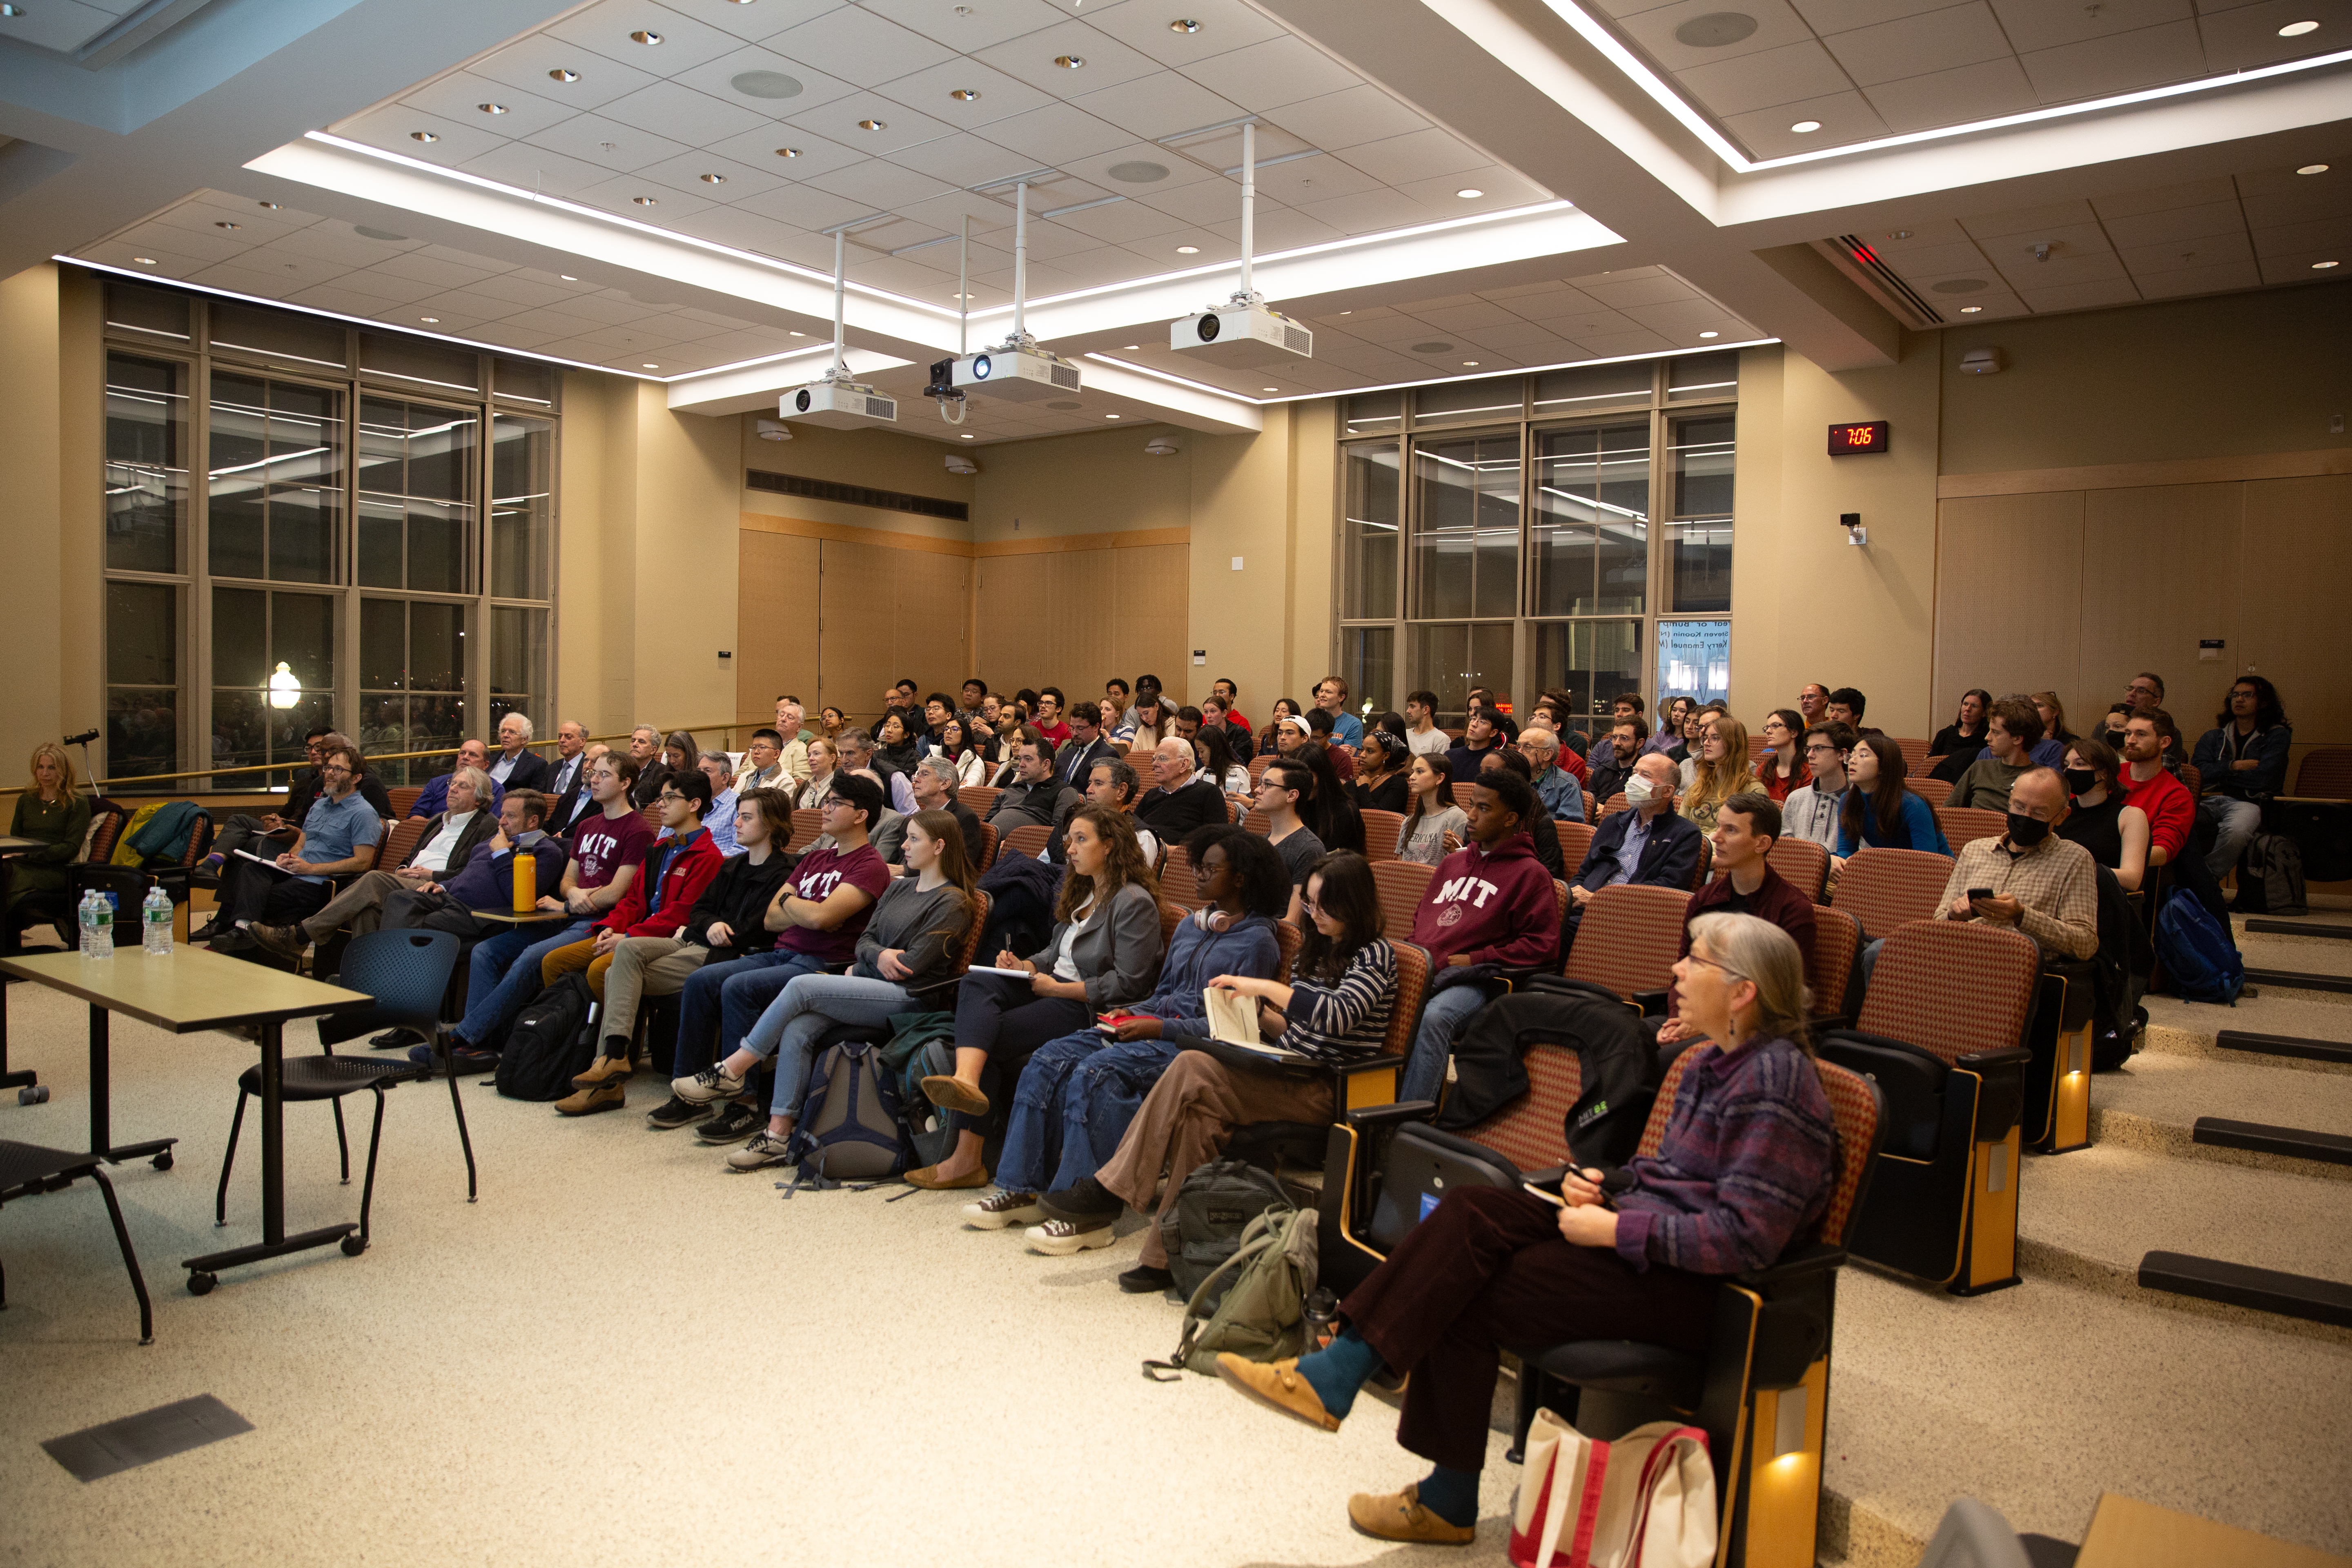 The audience during a "civil discourse" discussion of climate change in a room at MIT